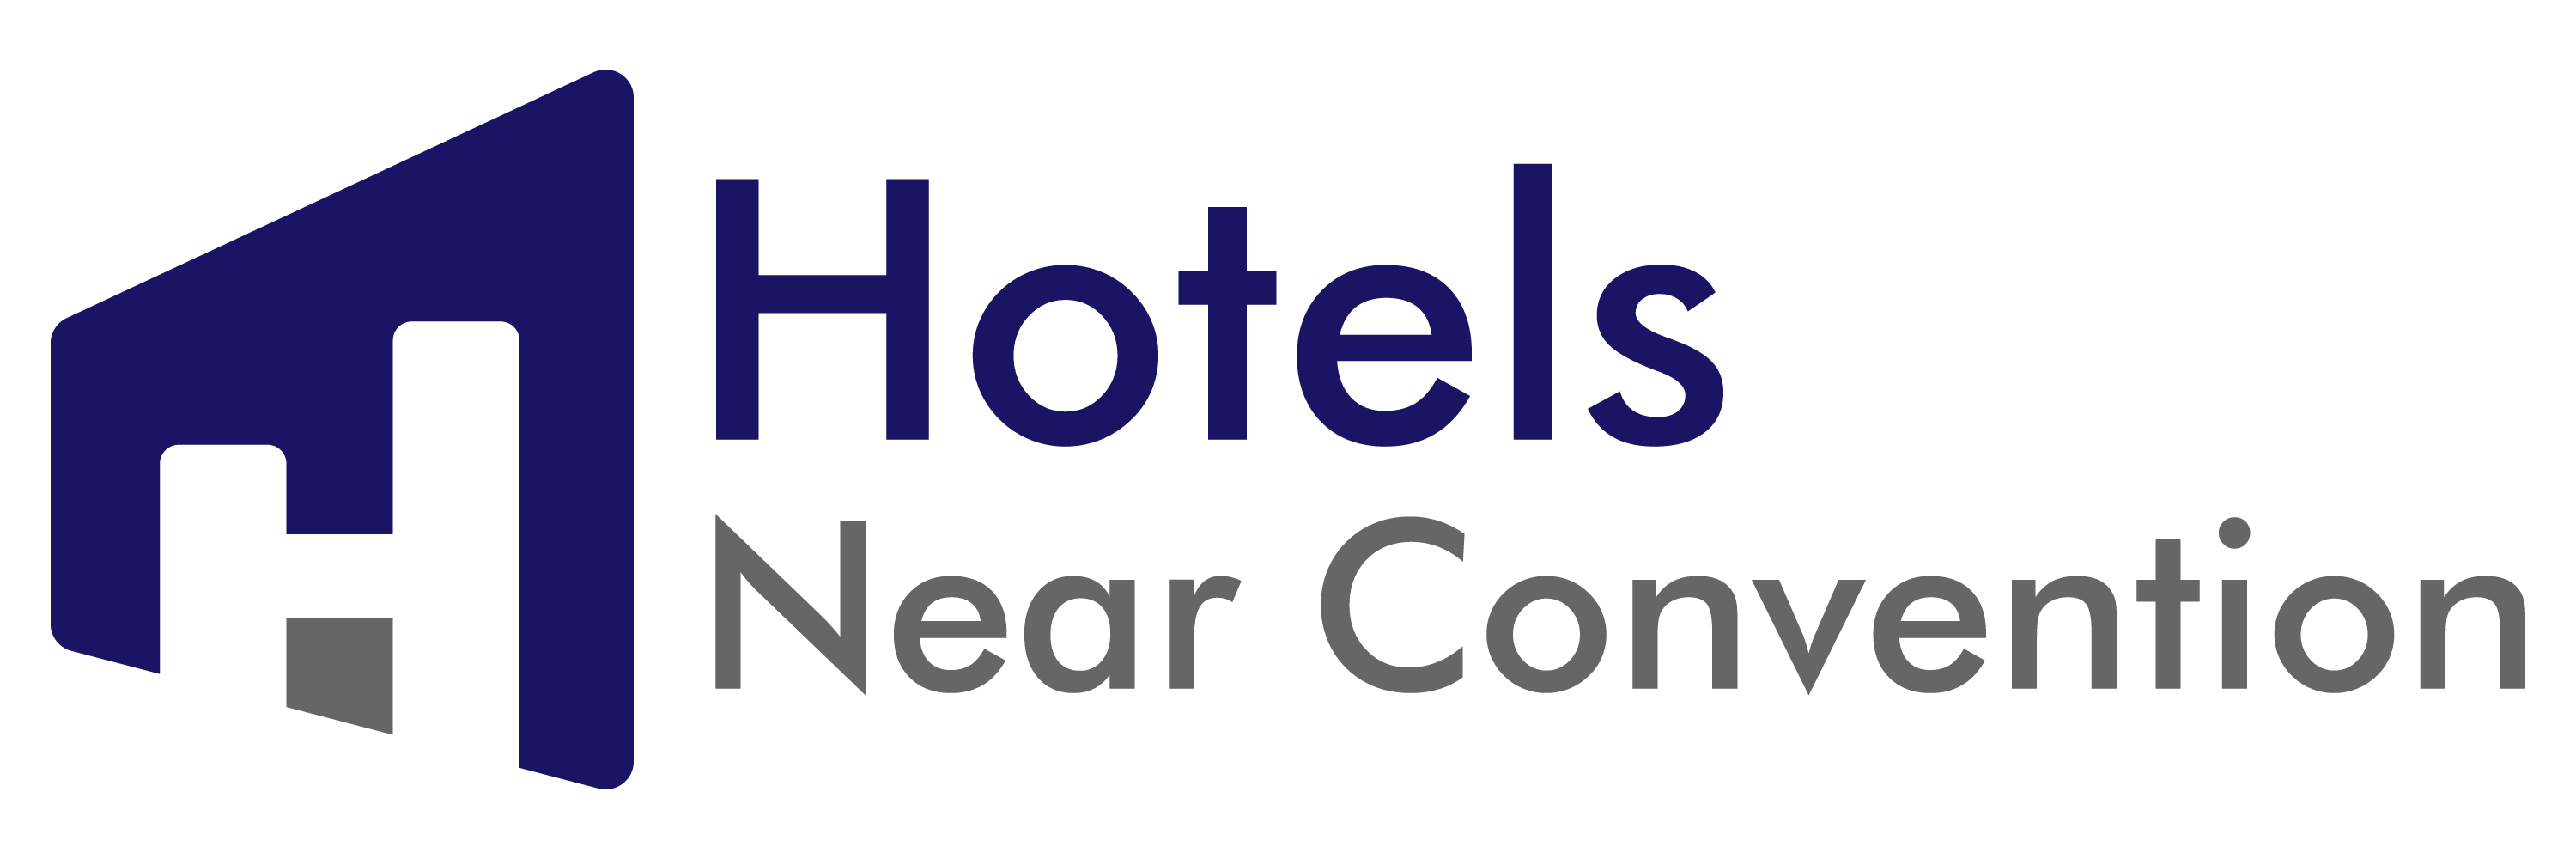 Hotels Near Conventions | The Constitution Inn - Hotels Near Conventions